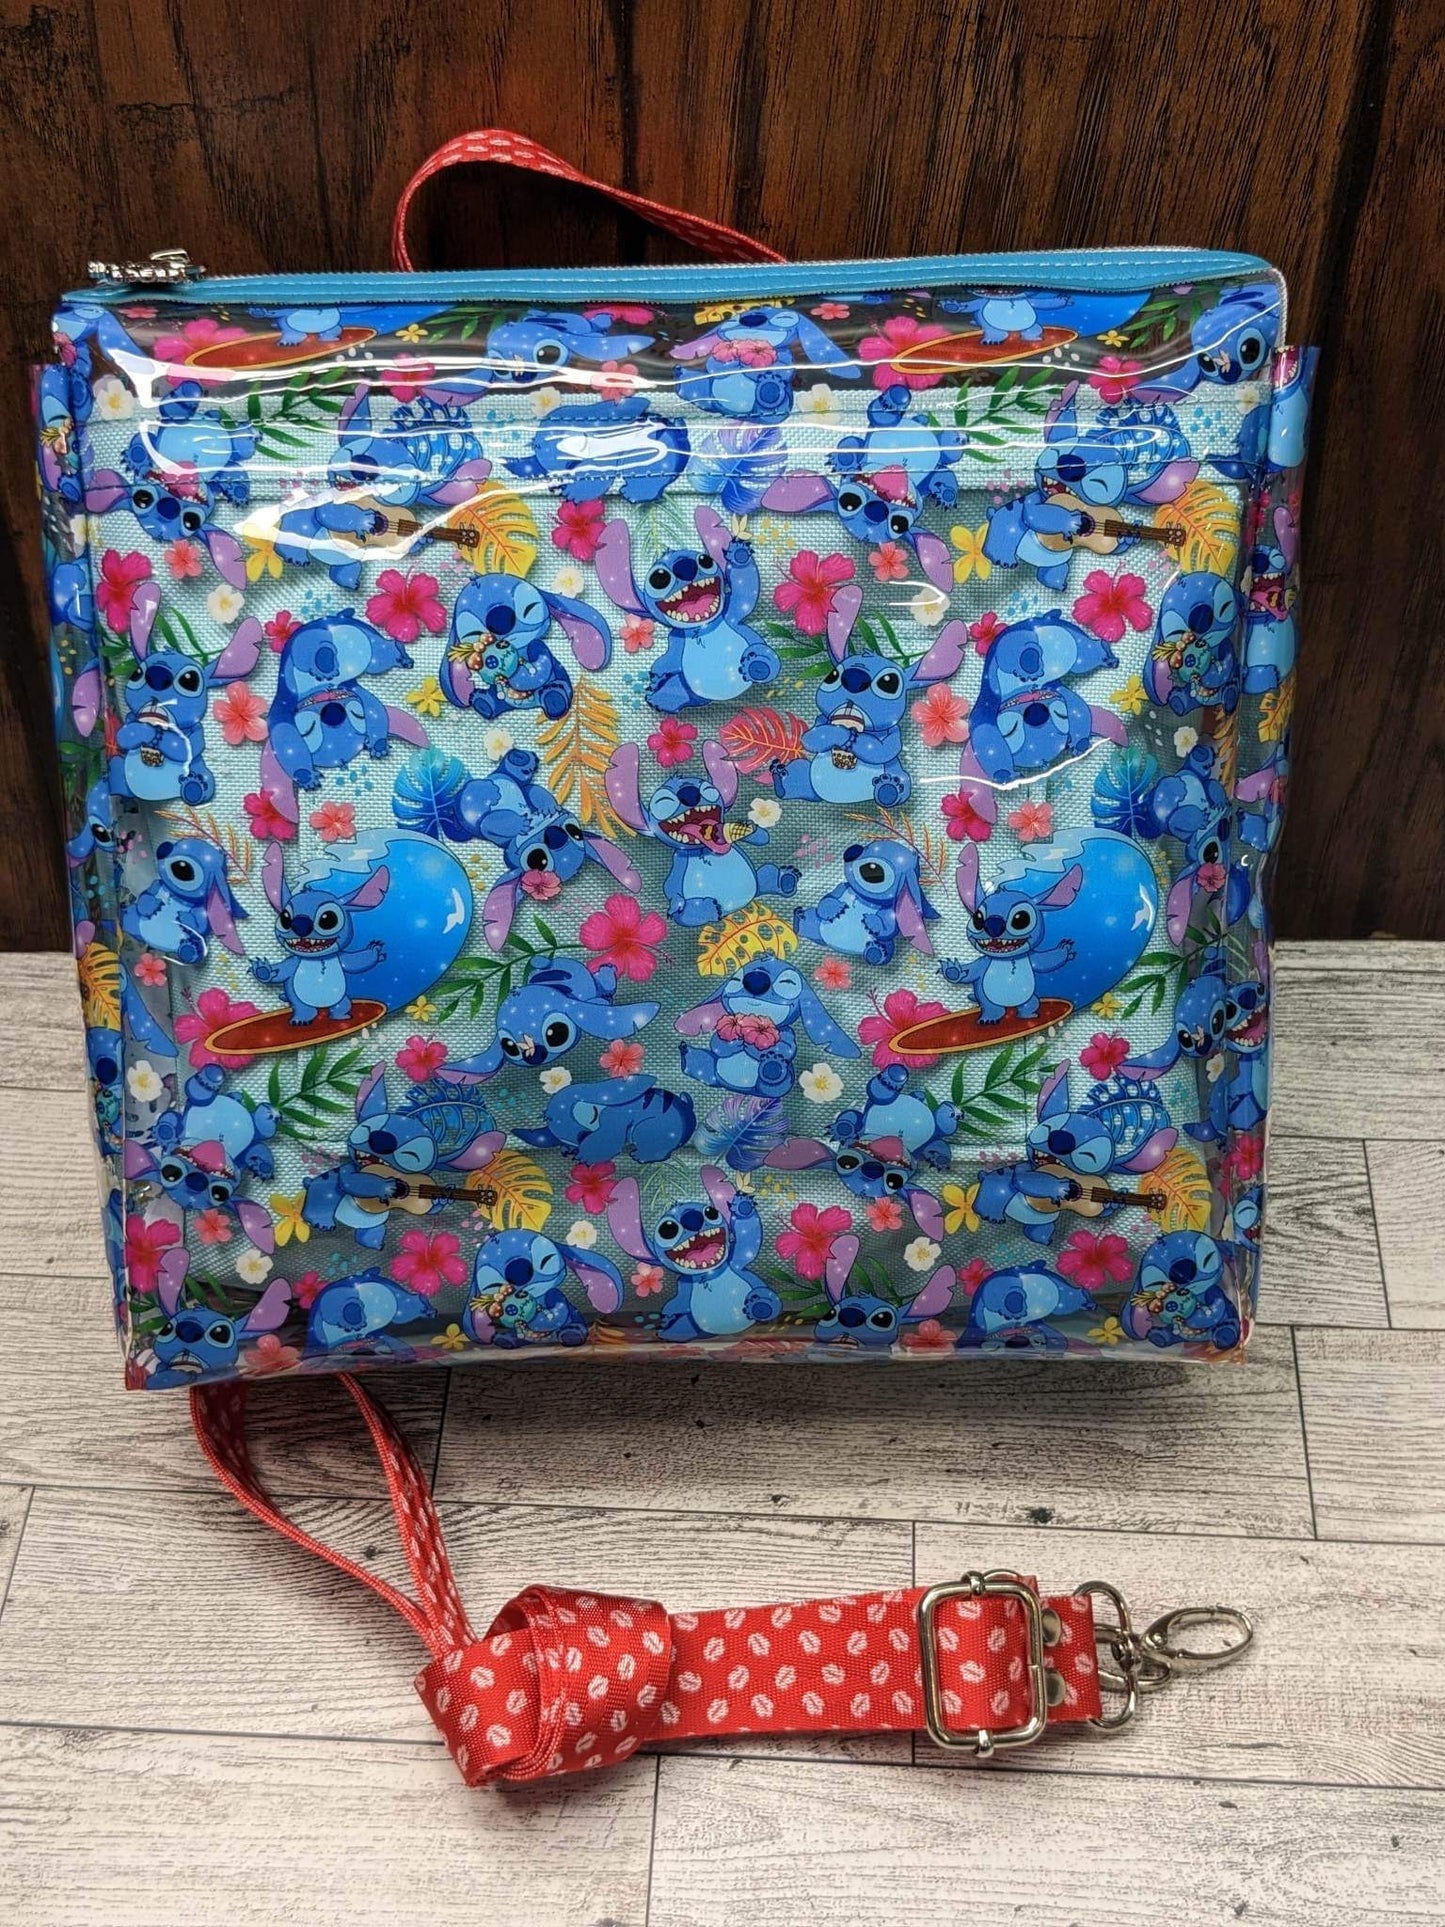 Truth Backpack PDF sewing pattern (includes SVGs)